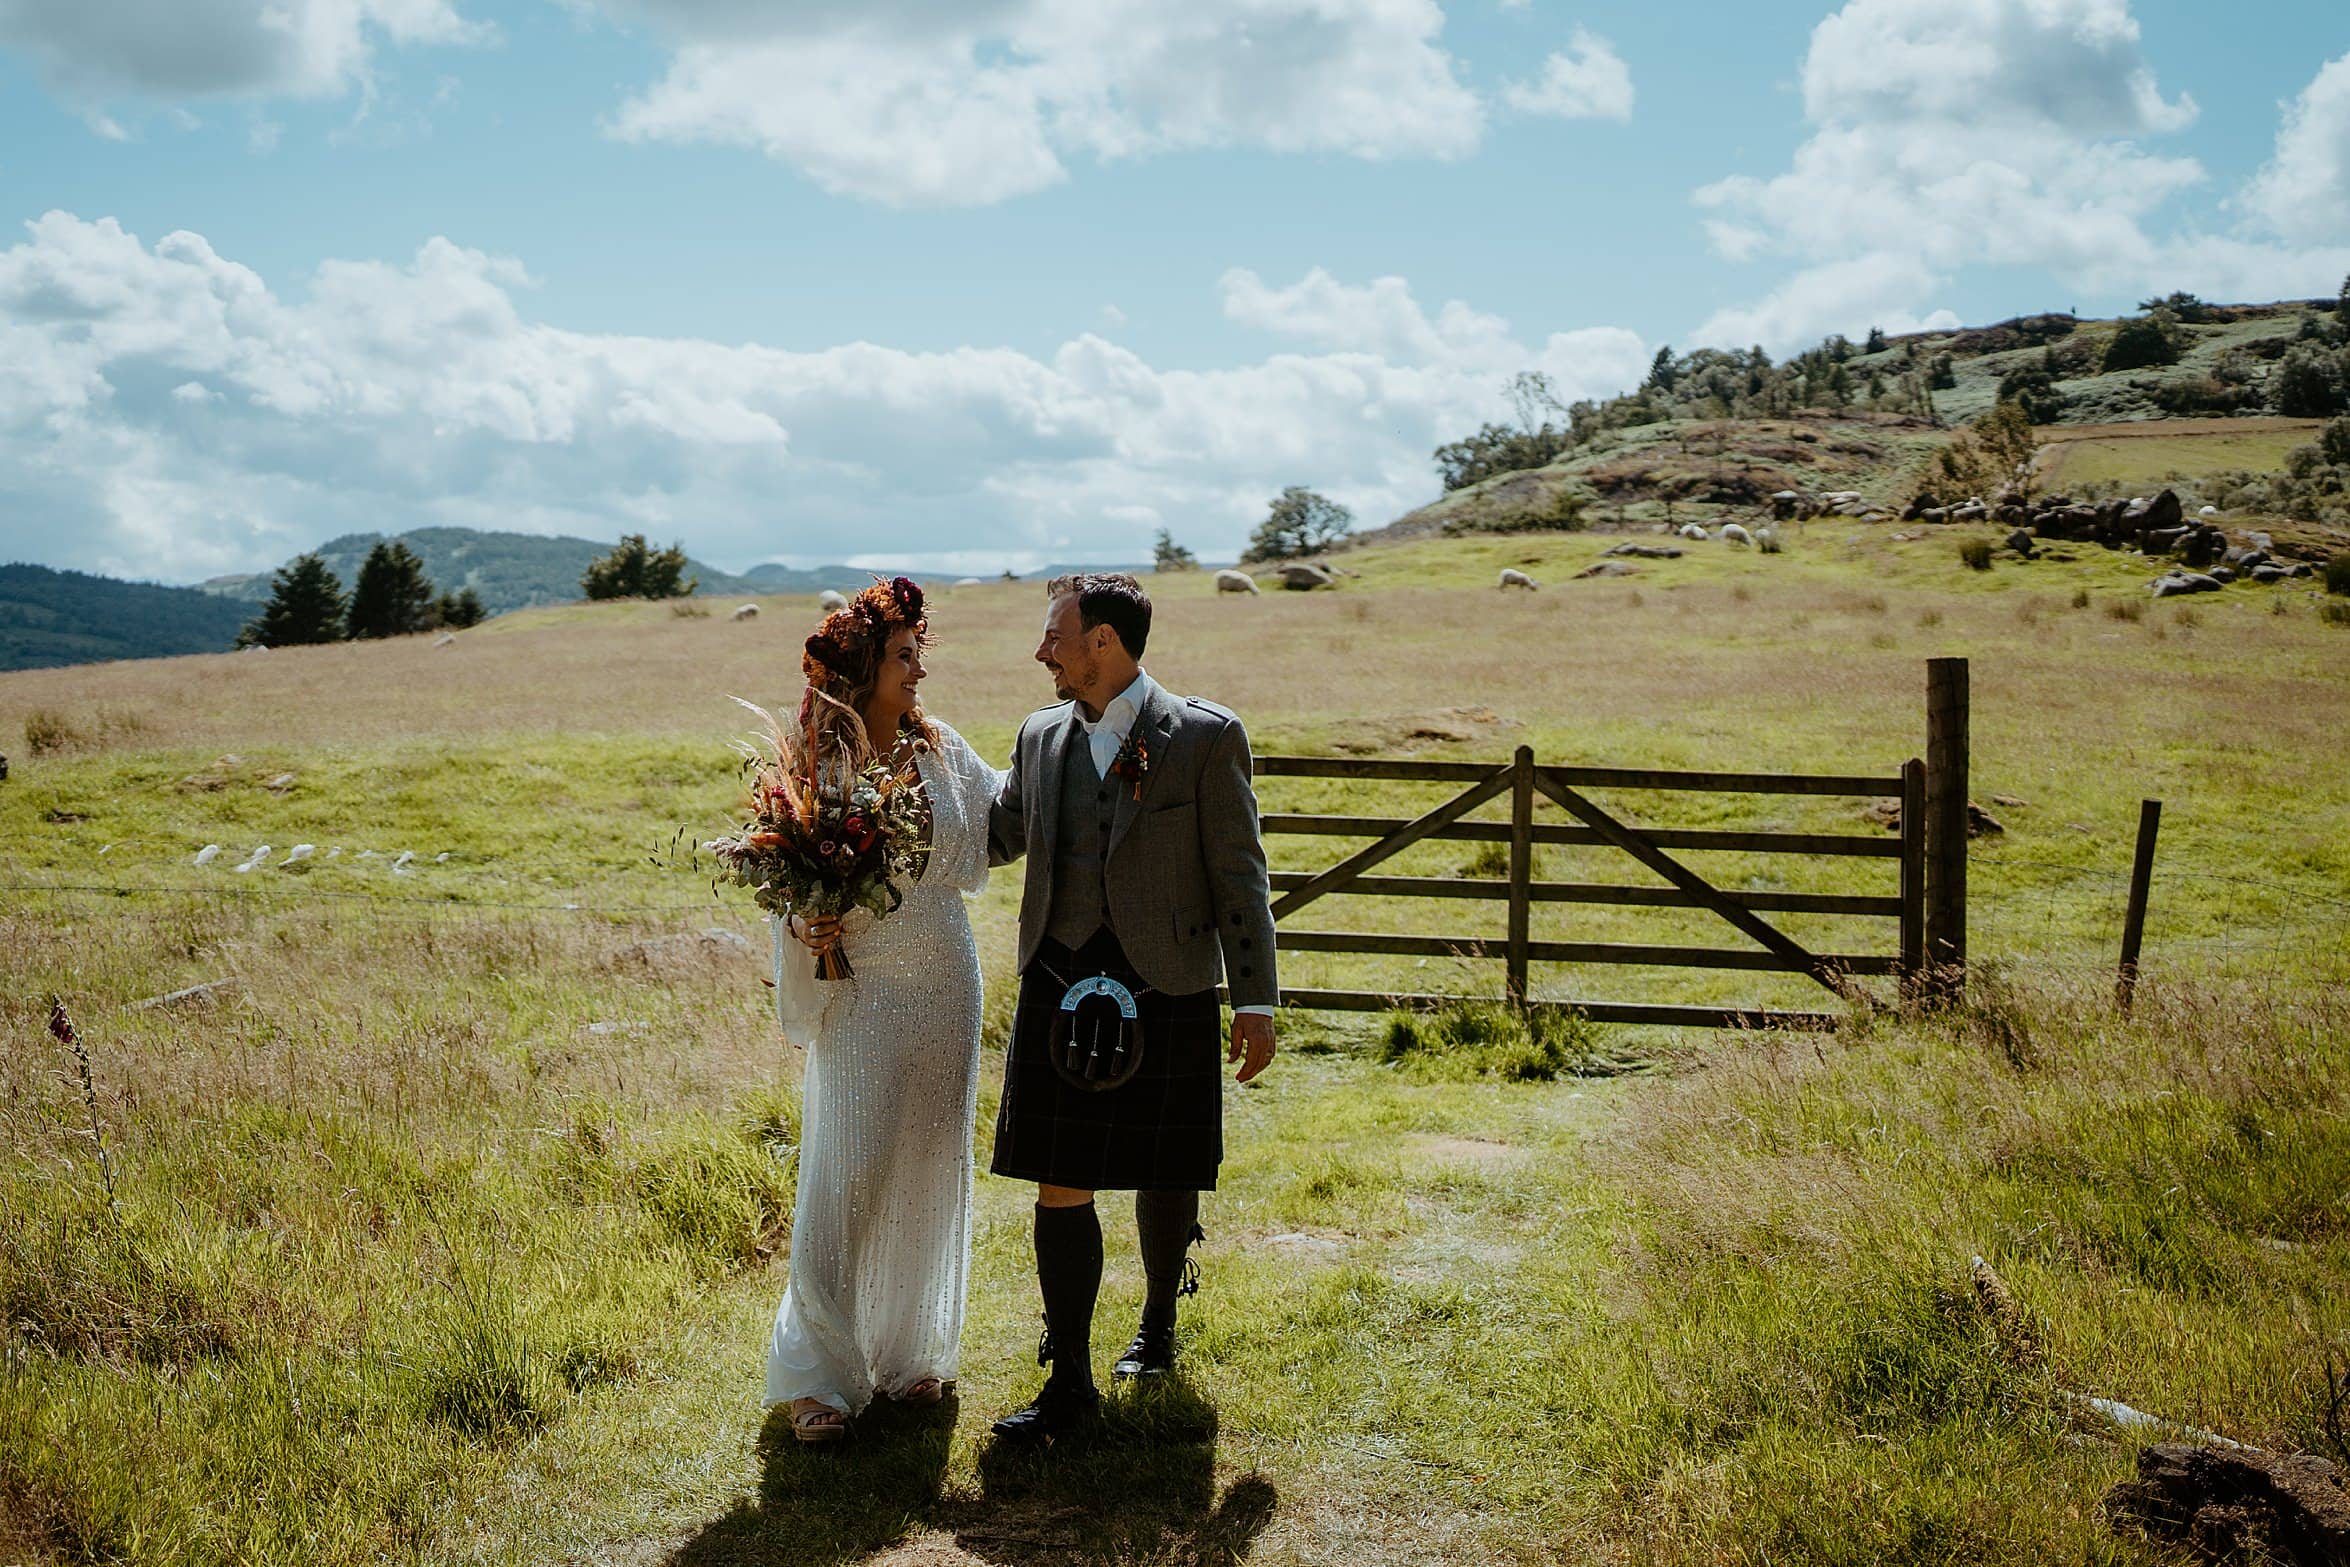 bride and groom smiling at each other as they pose in front of wooden fence in field on sunny day with blue skies cardney steading wedding perthshire